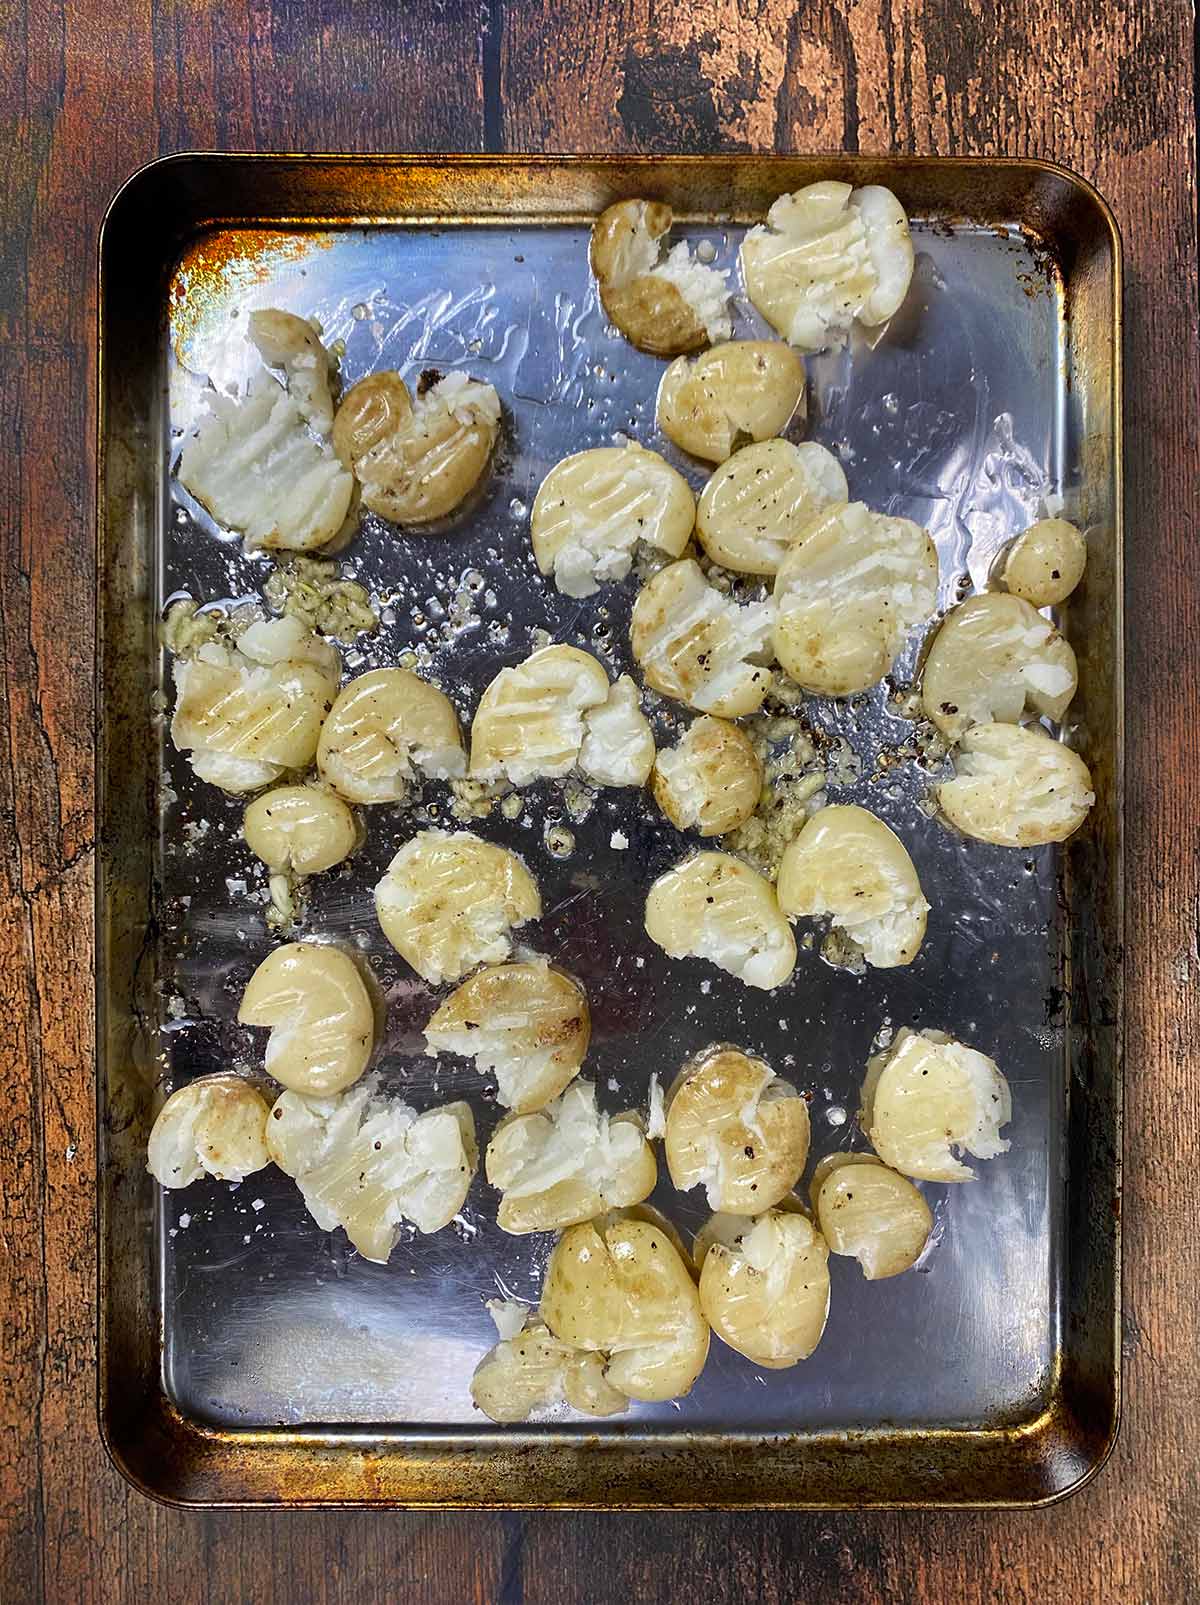 Part cooked potatoes on a baking tray that have been partly crushed.